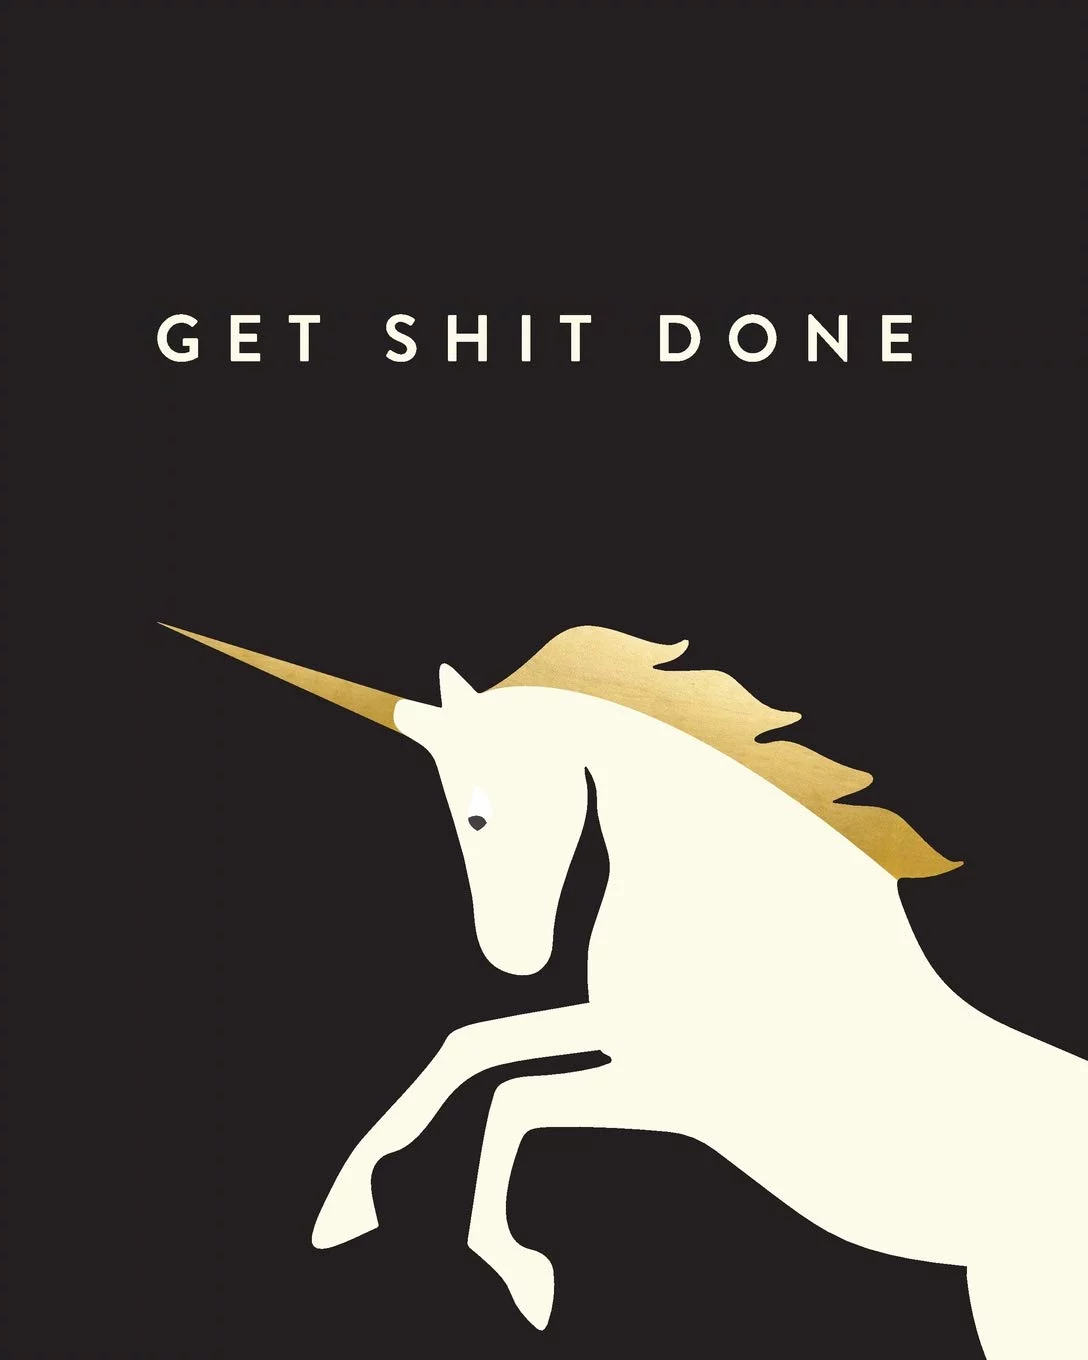 Best Coworker Gifts 2022: Get Shit Done Unicorn Notebook 2022